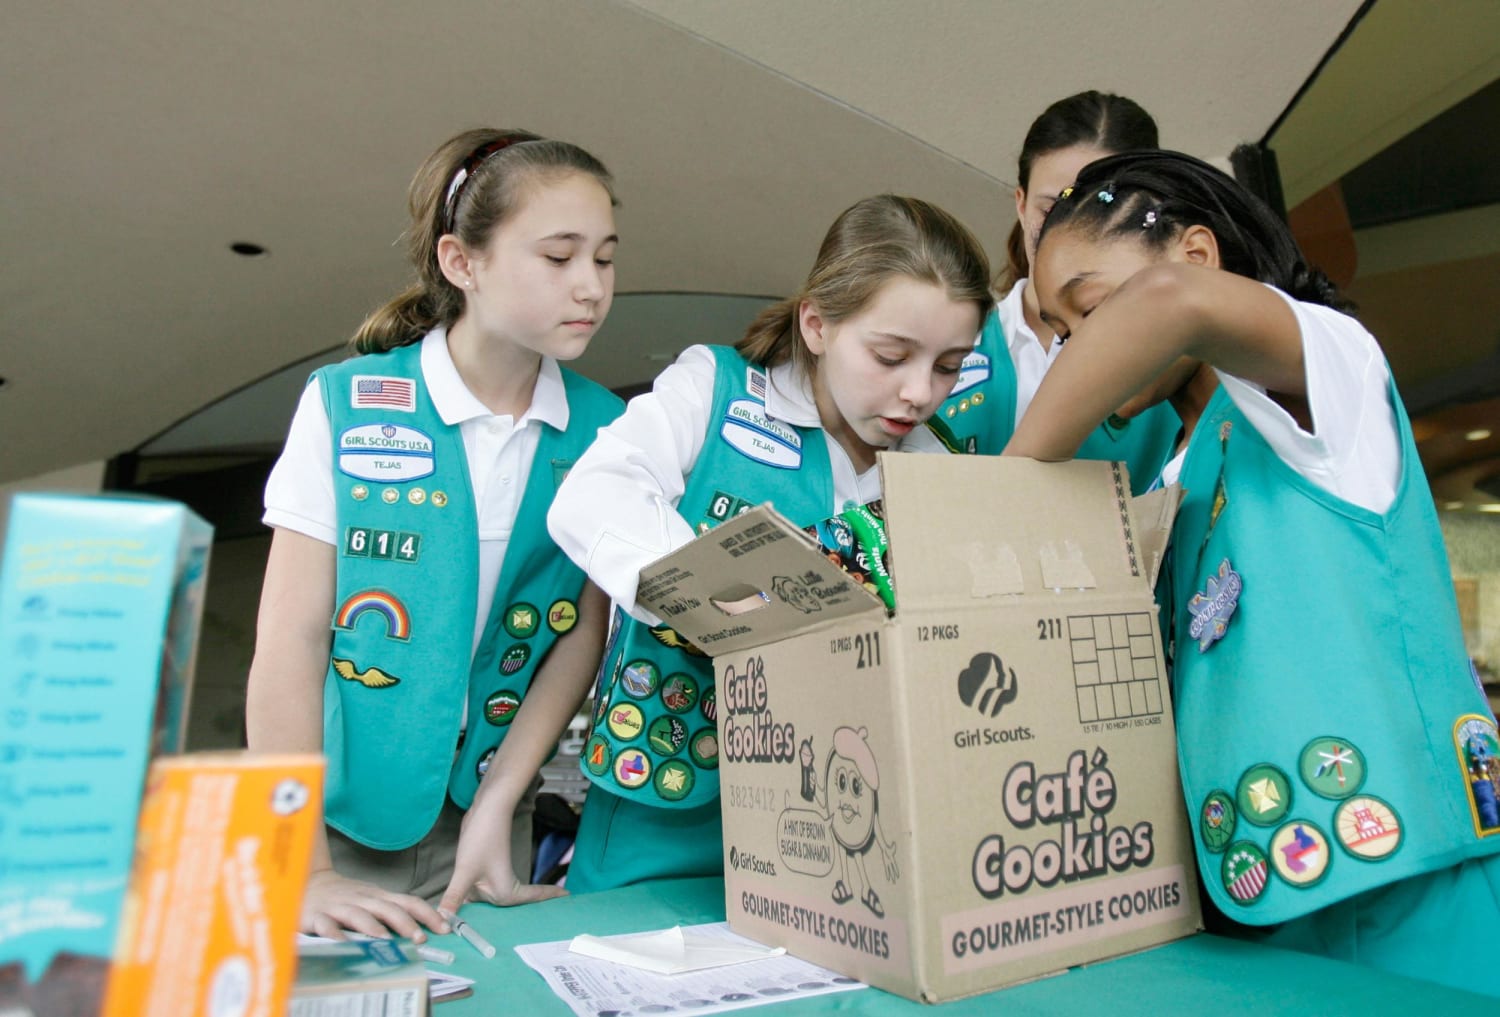 Girl scout vr